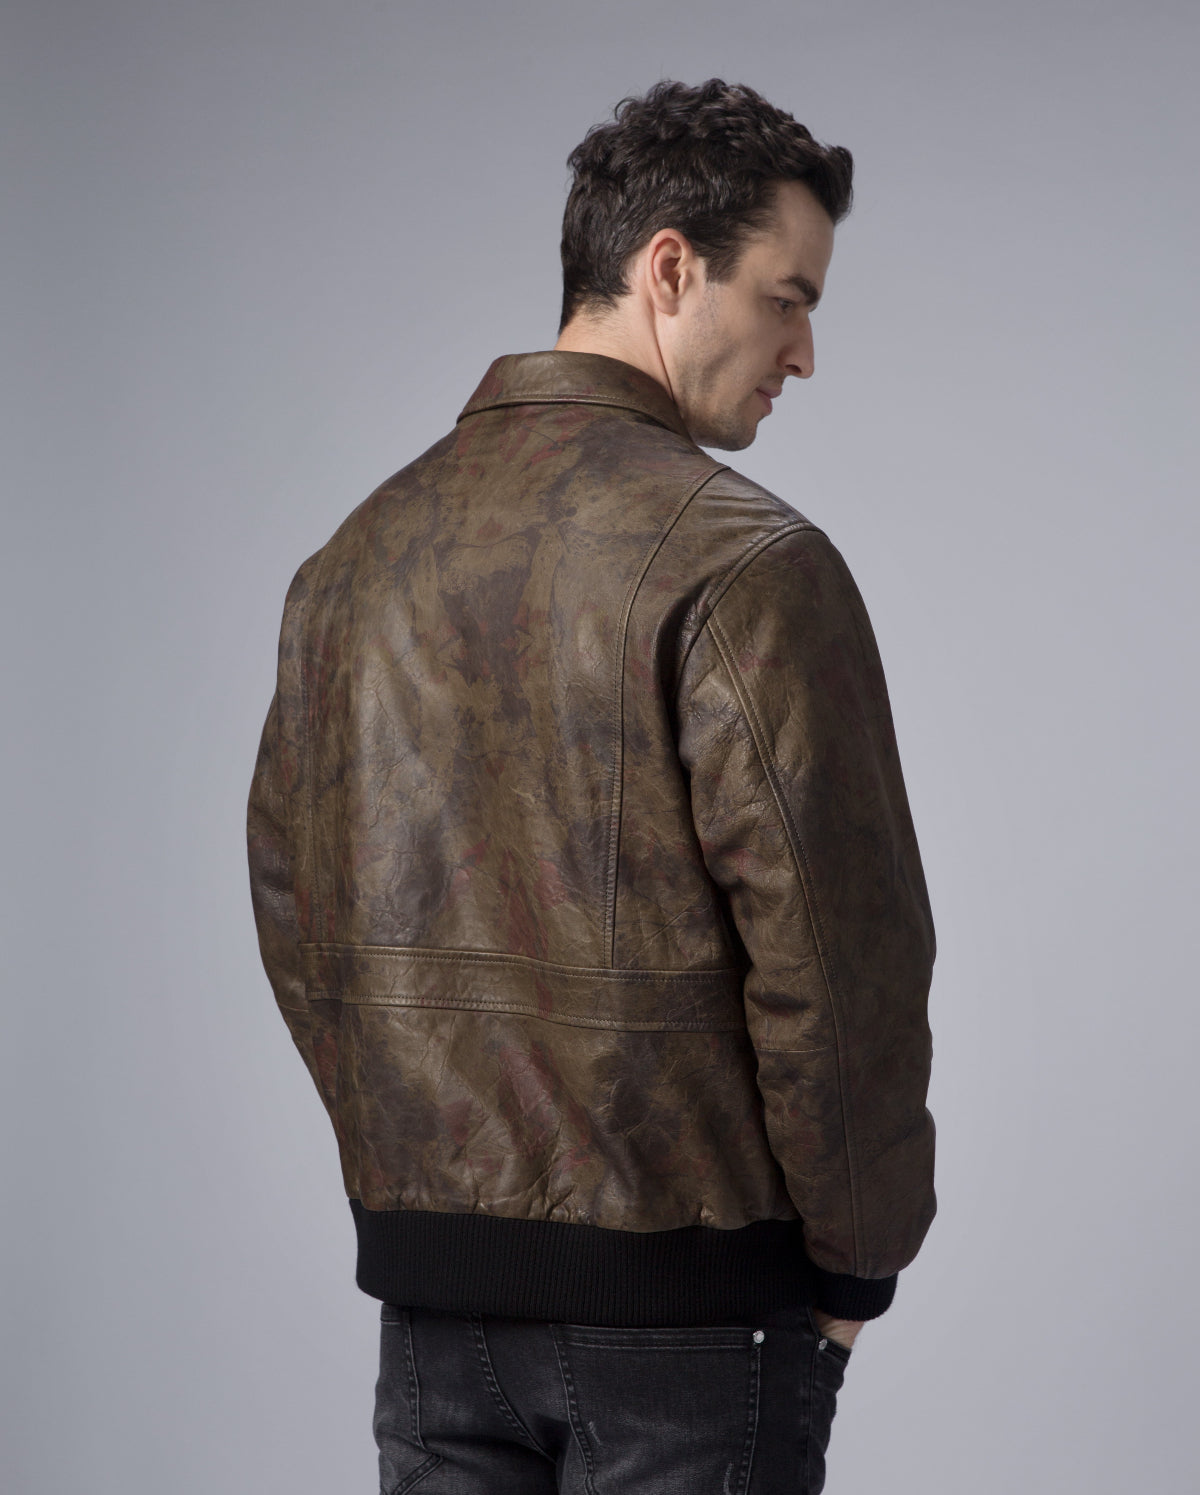 Green Camouflage Air Force A-2 Goatskin Leather Flight Bomber Jacket